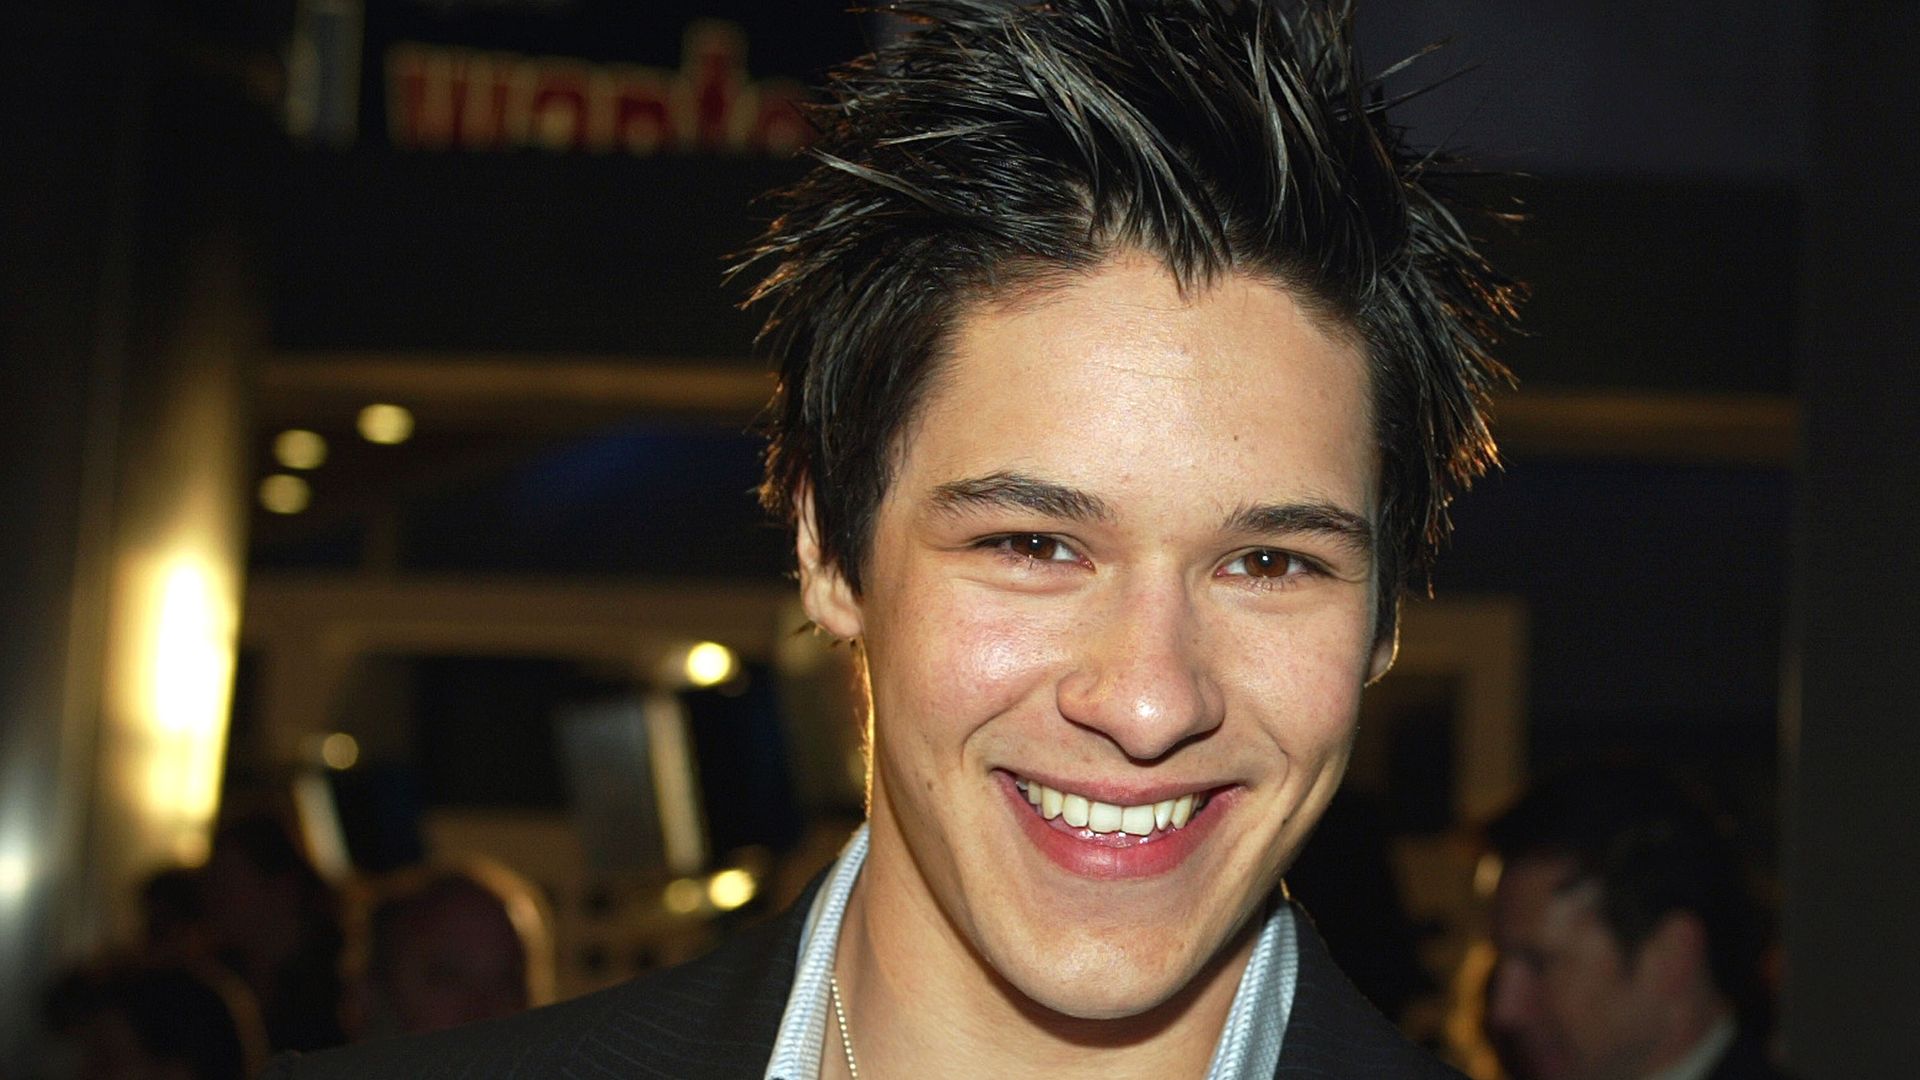 Actor Oliver James arrives at the premiere of "What A Girl Wants" at the Cinerama Dome Theater on March 27, 2003 in Hollywood, California. (Photo by Kevin Winter/Getty Images)